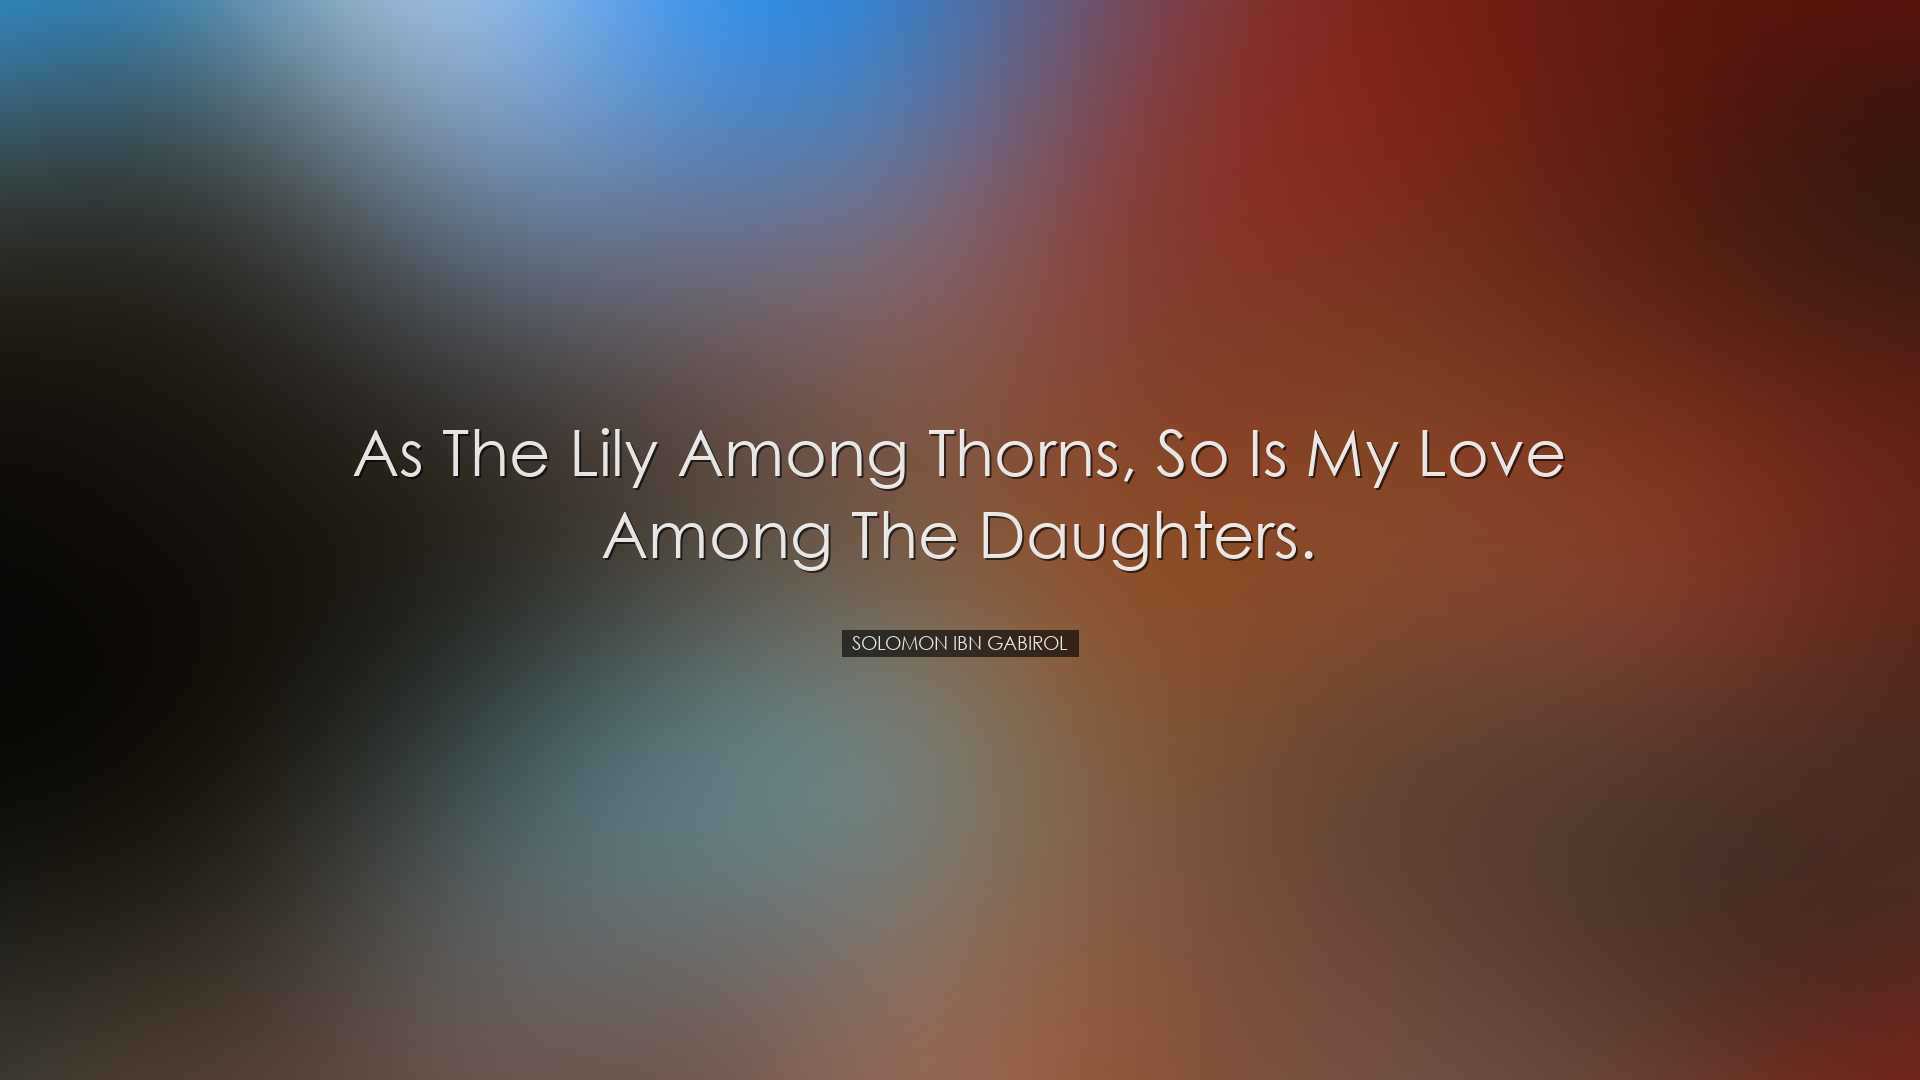 As the lily among thorns, so is my love among the daughters. - Sol